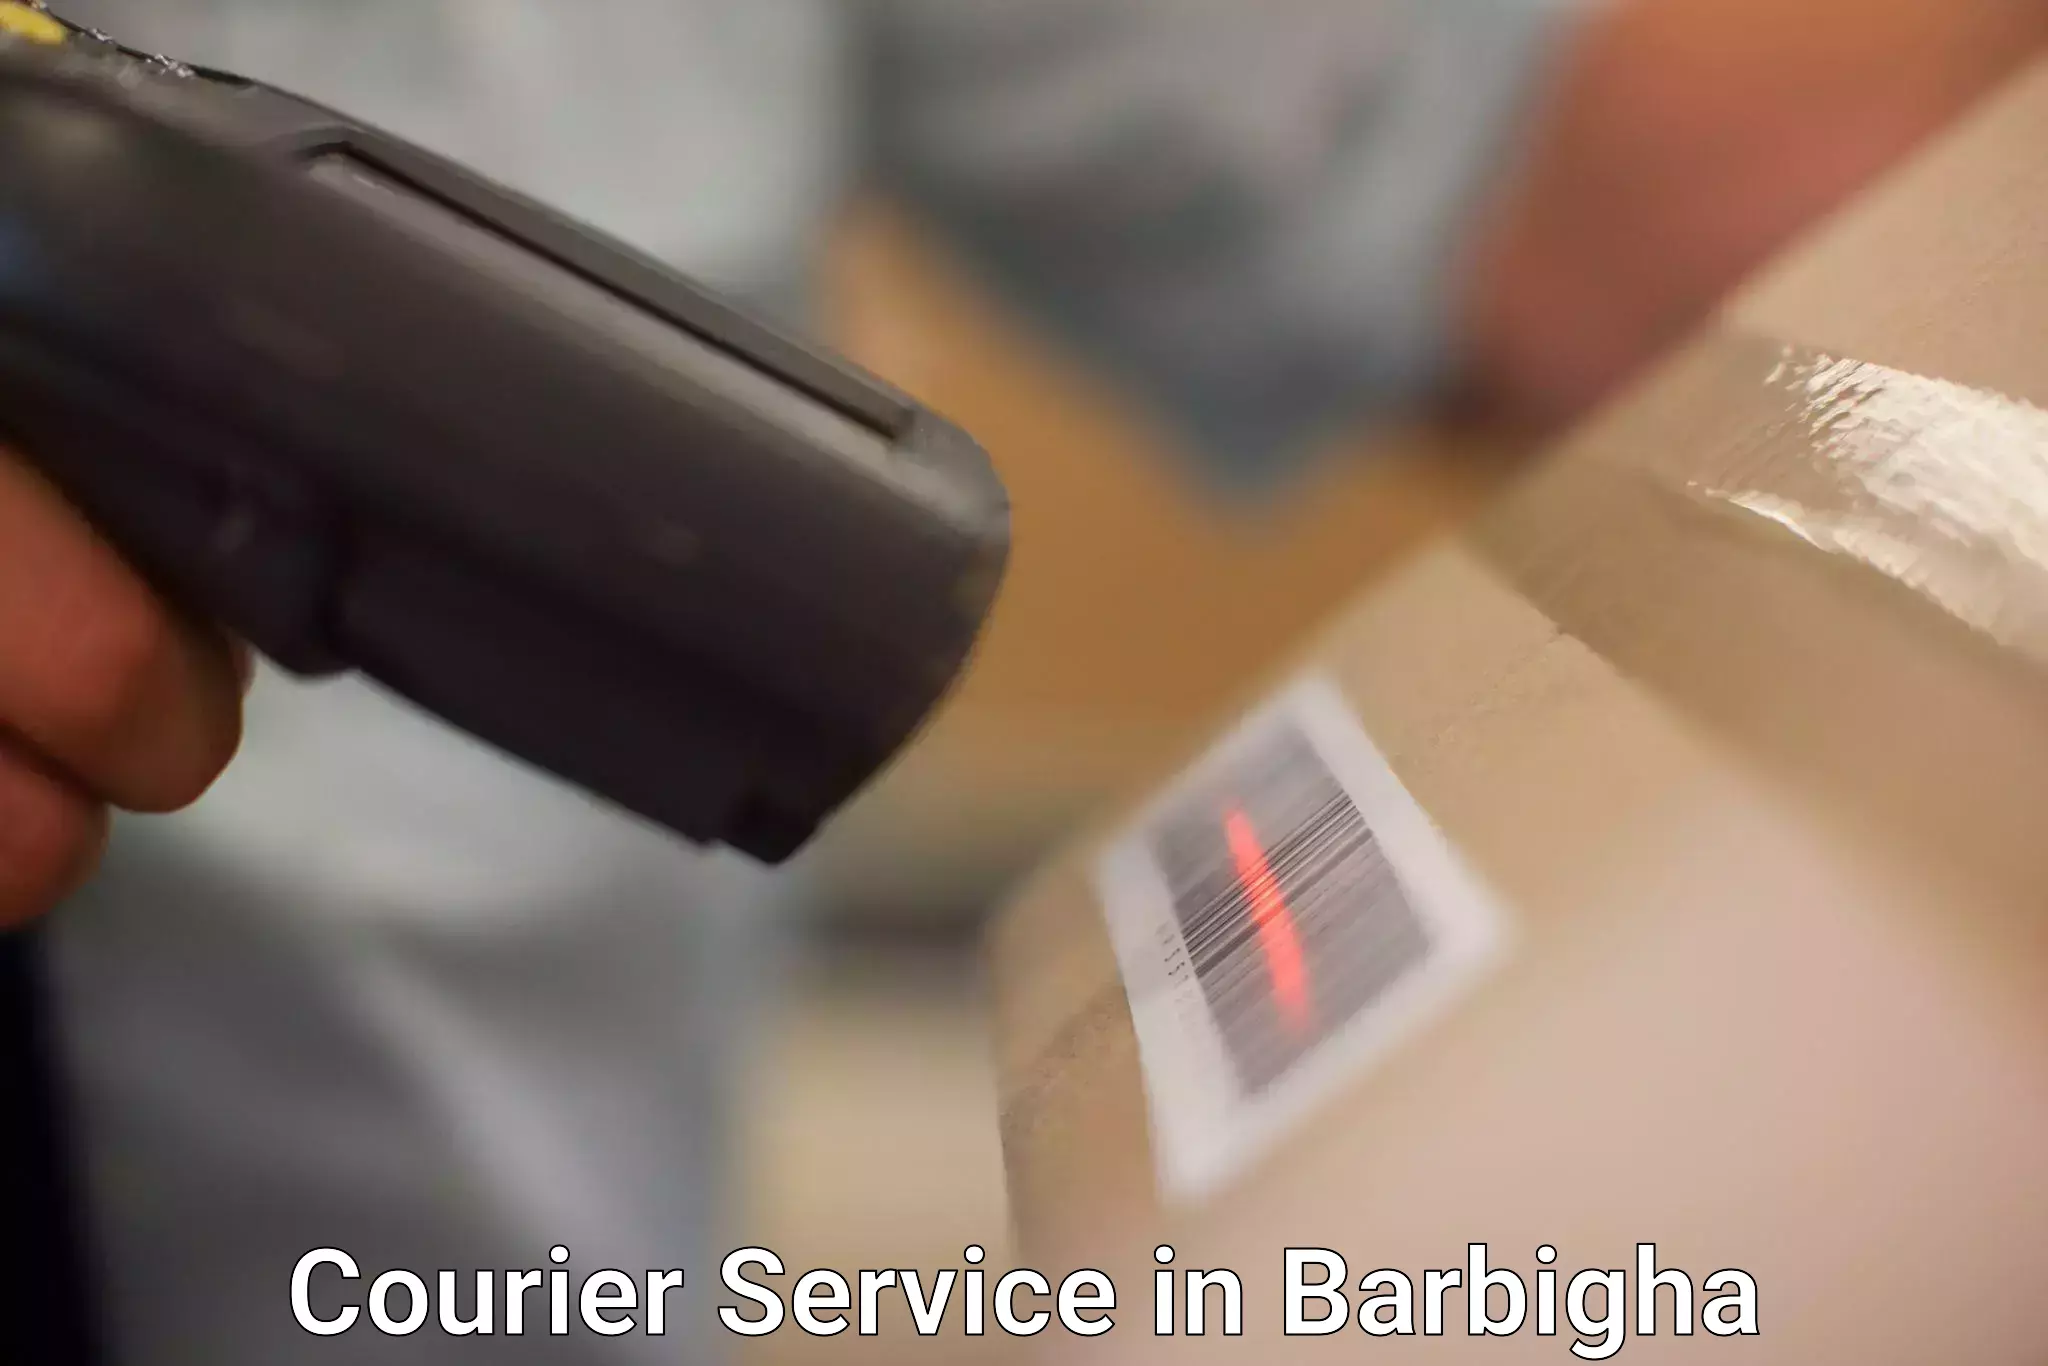 Multi-service courier options in Barbigha